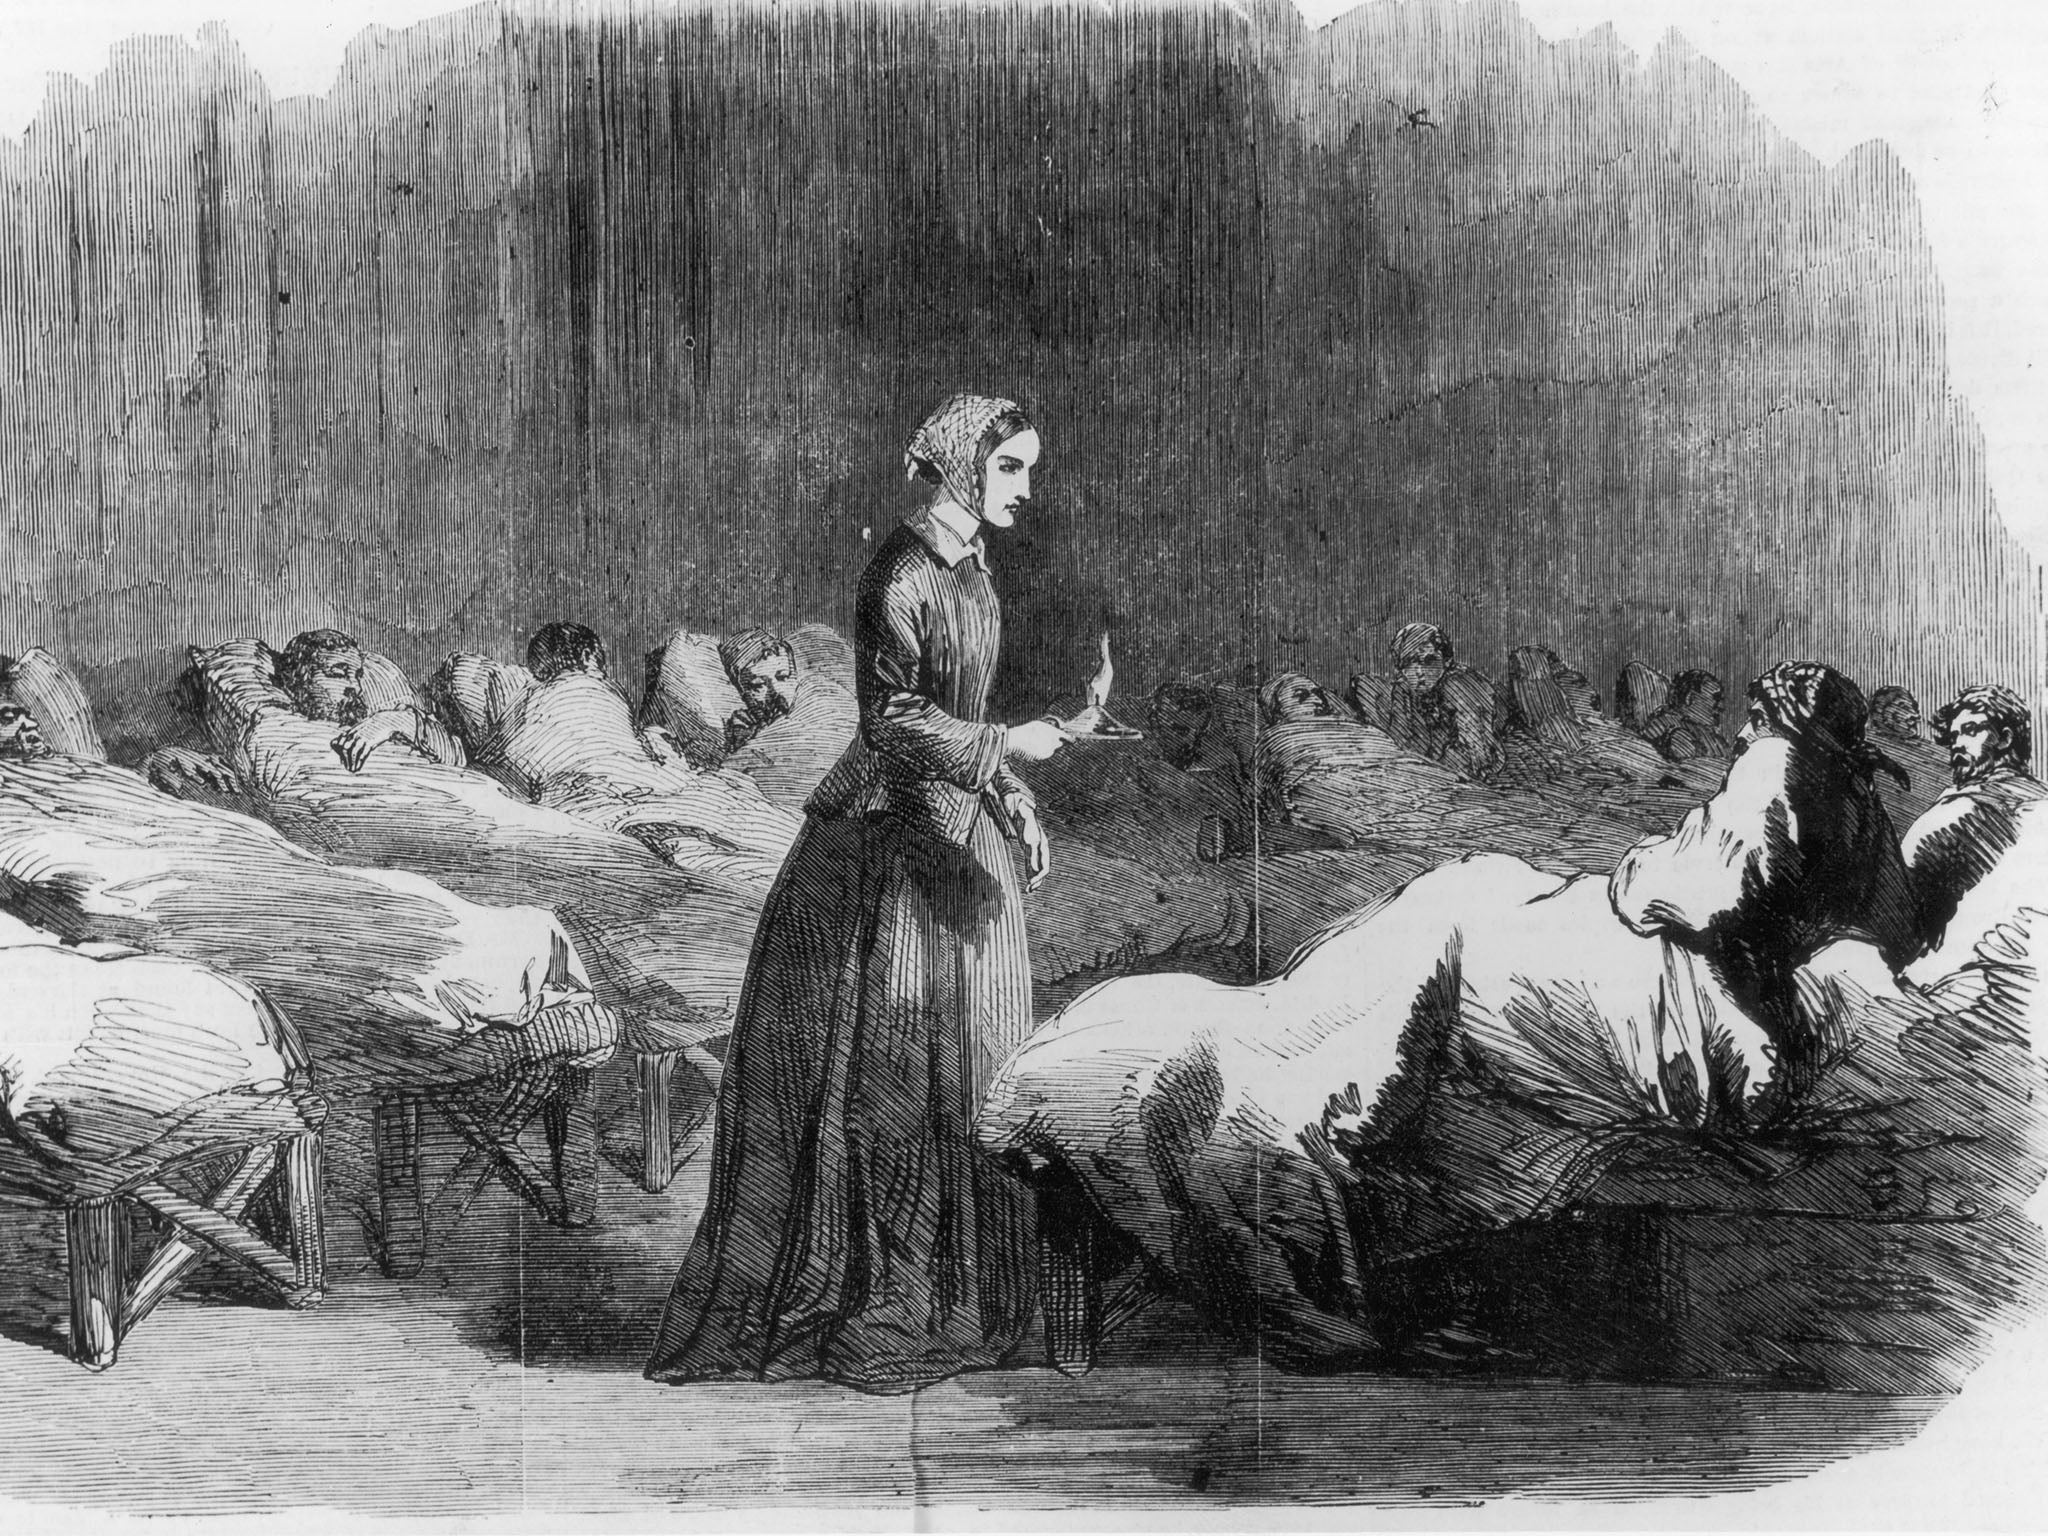 An illustration of Nightingale make her nightly rounds during the Crimean War in the 1850s